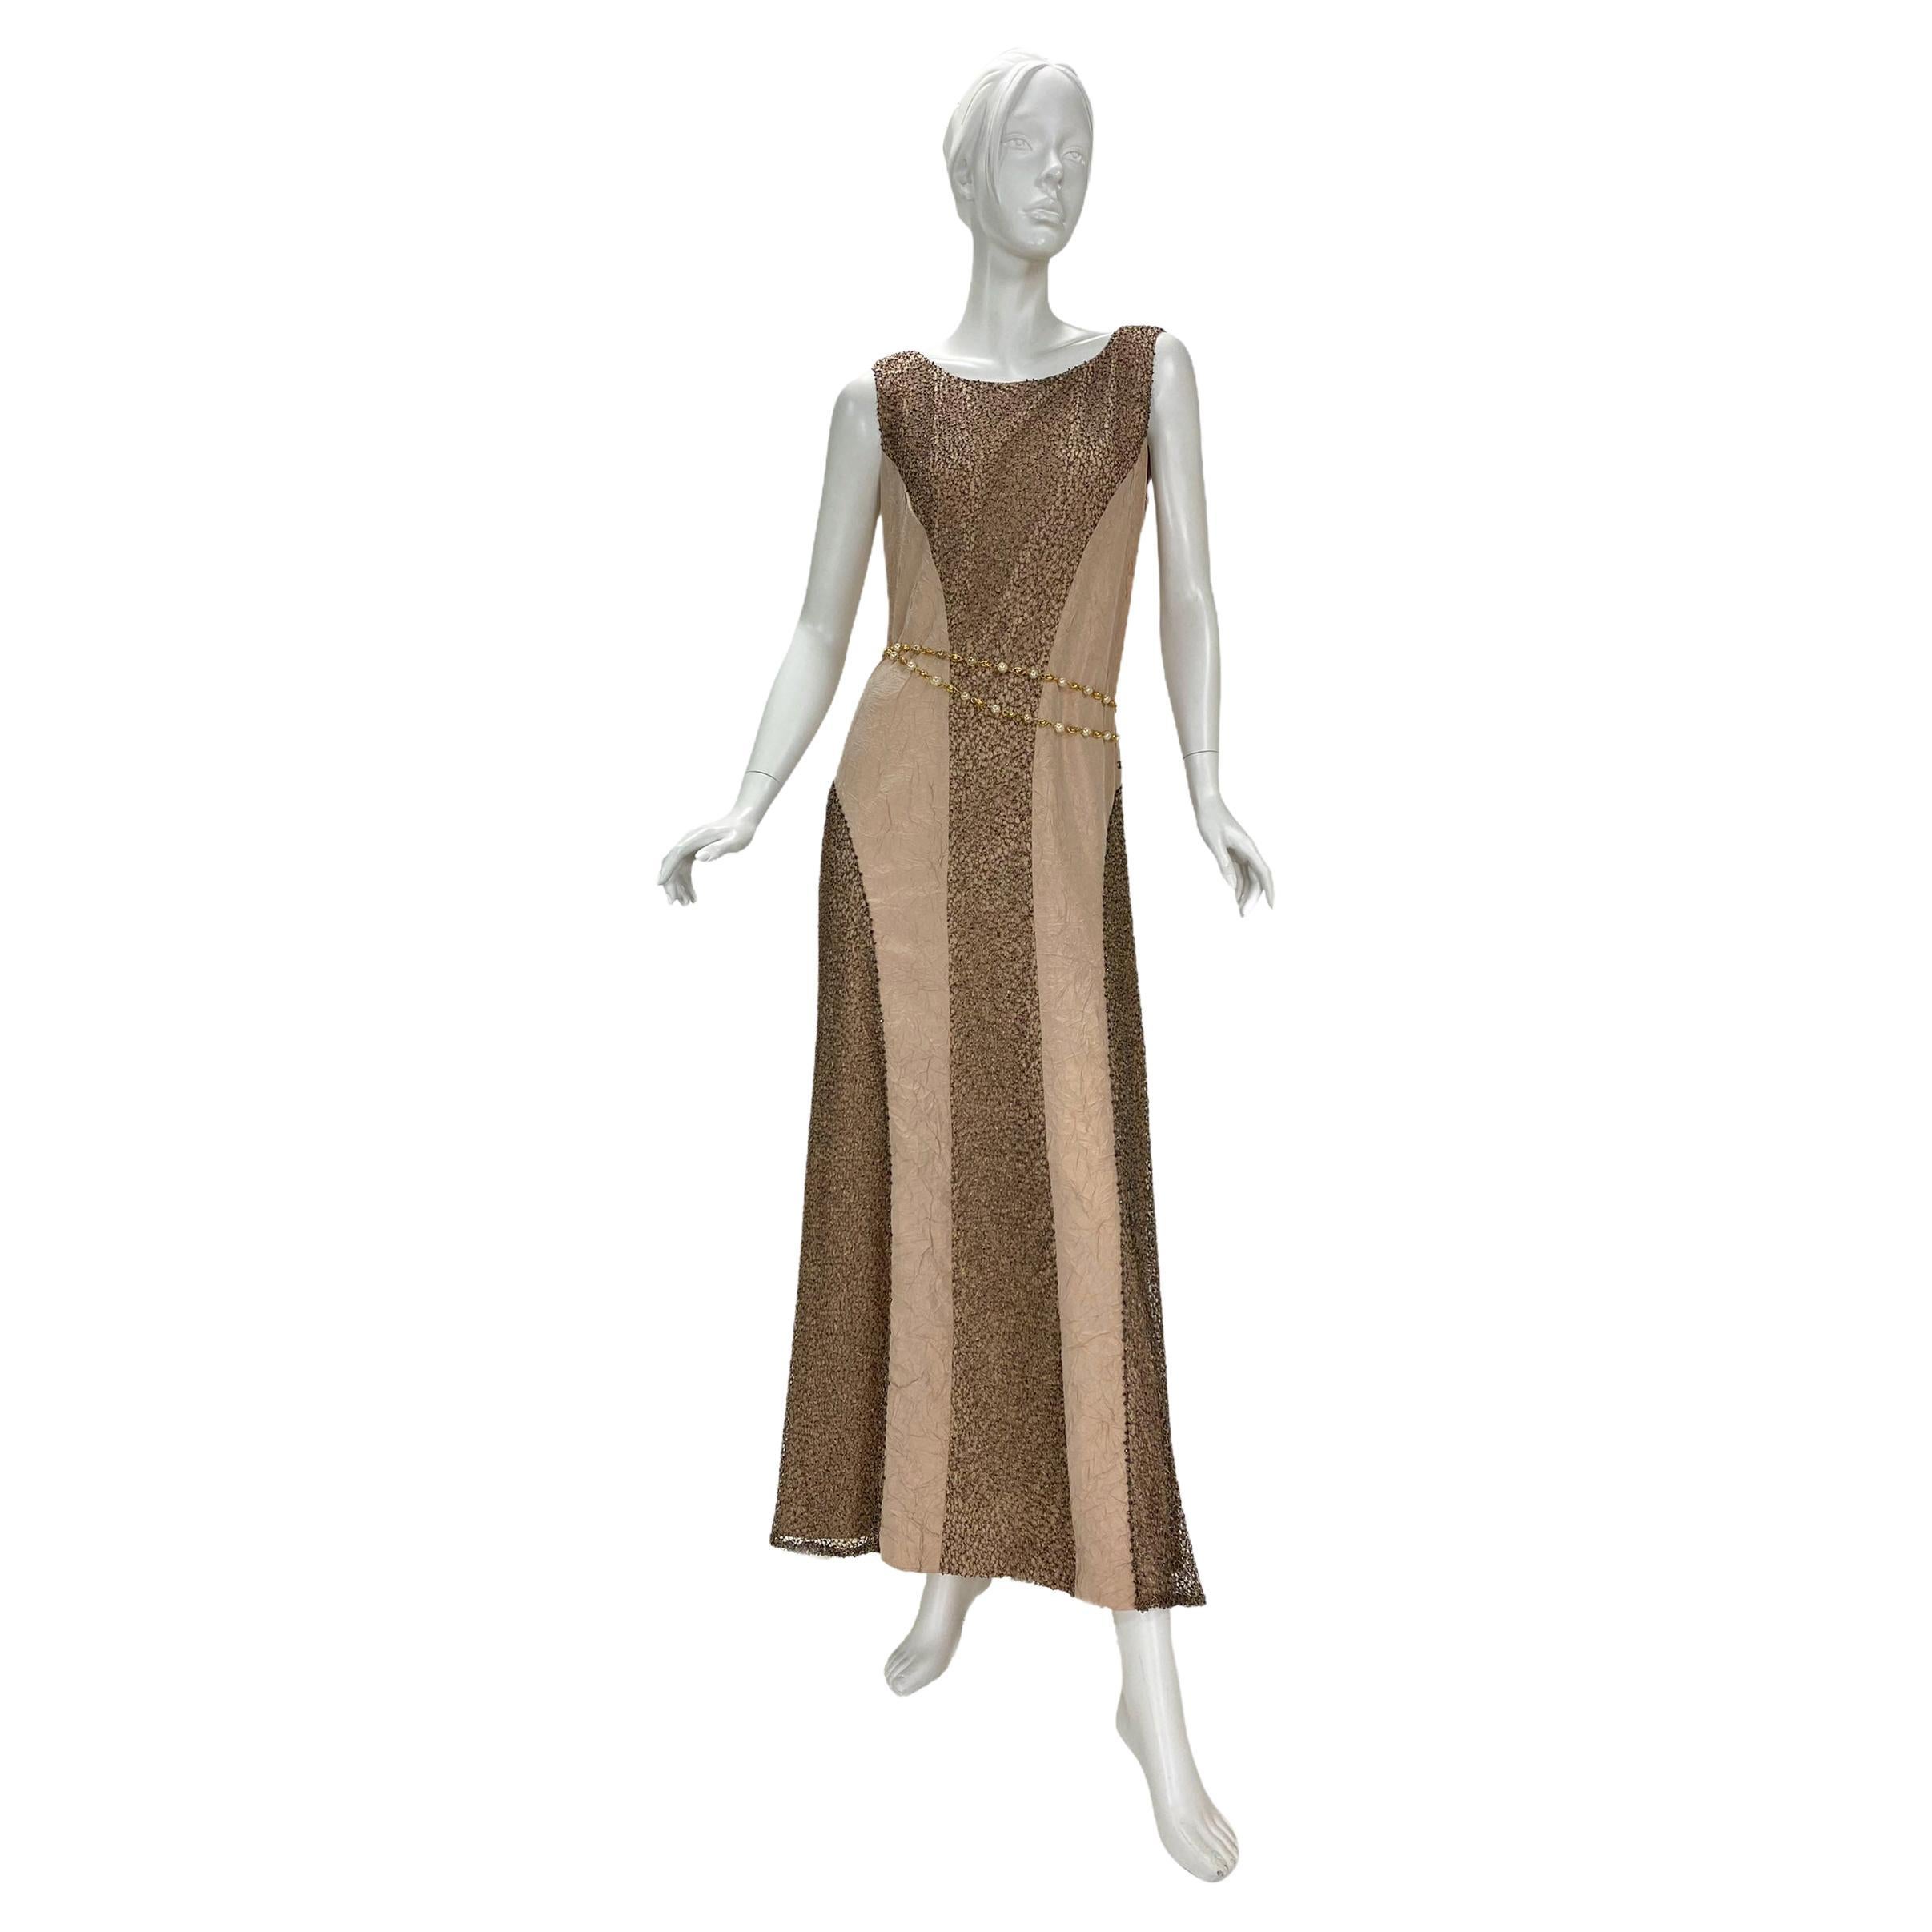 Cruise 2000 Vintage
Karl Lagerfeld for Chanel Embellished Dress
First Chanel Cruise Collection! Significant historical piece.
Details:
FR Size 40 – US 8
Silk Blend
Gold thread, beads
Condition:
Excellent condition (belt is not included)